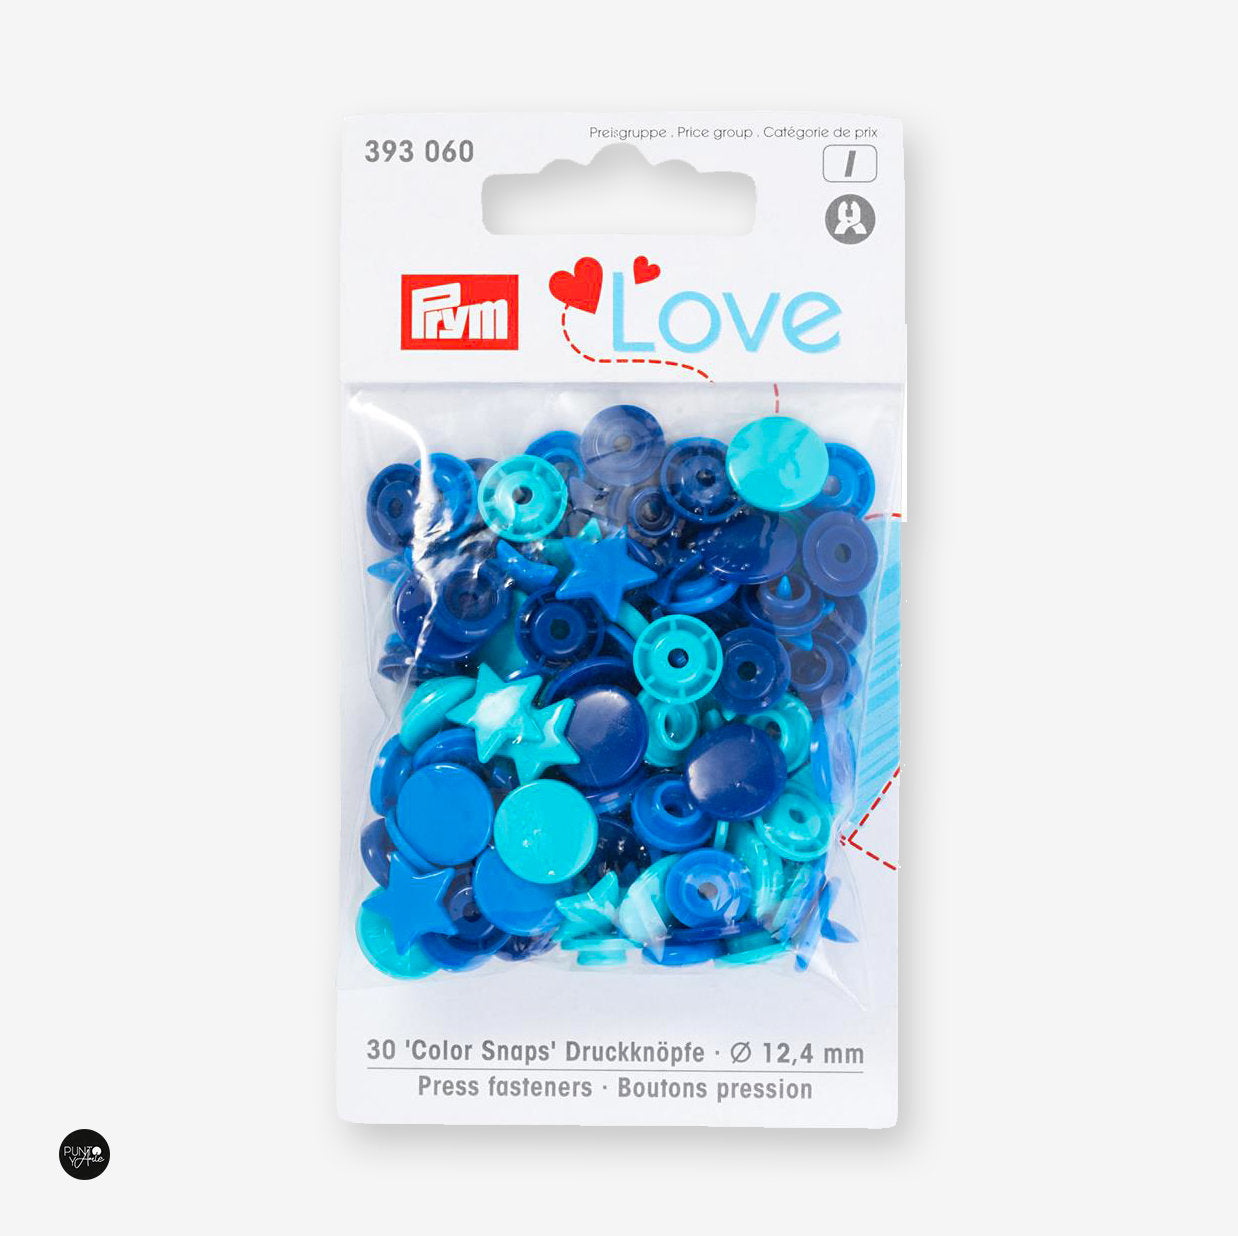 Press Buttons Or Snaps 12.4 mm - Prym Love 393060